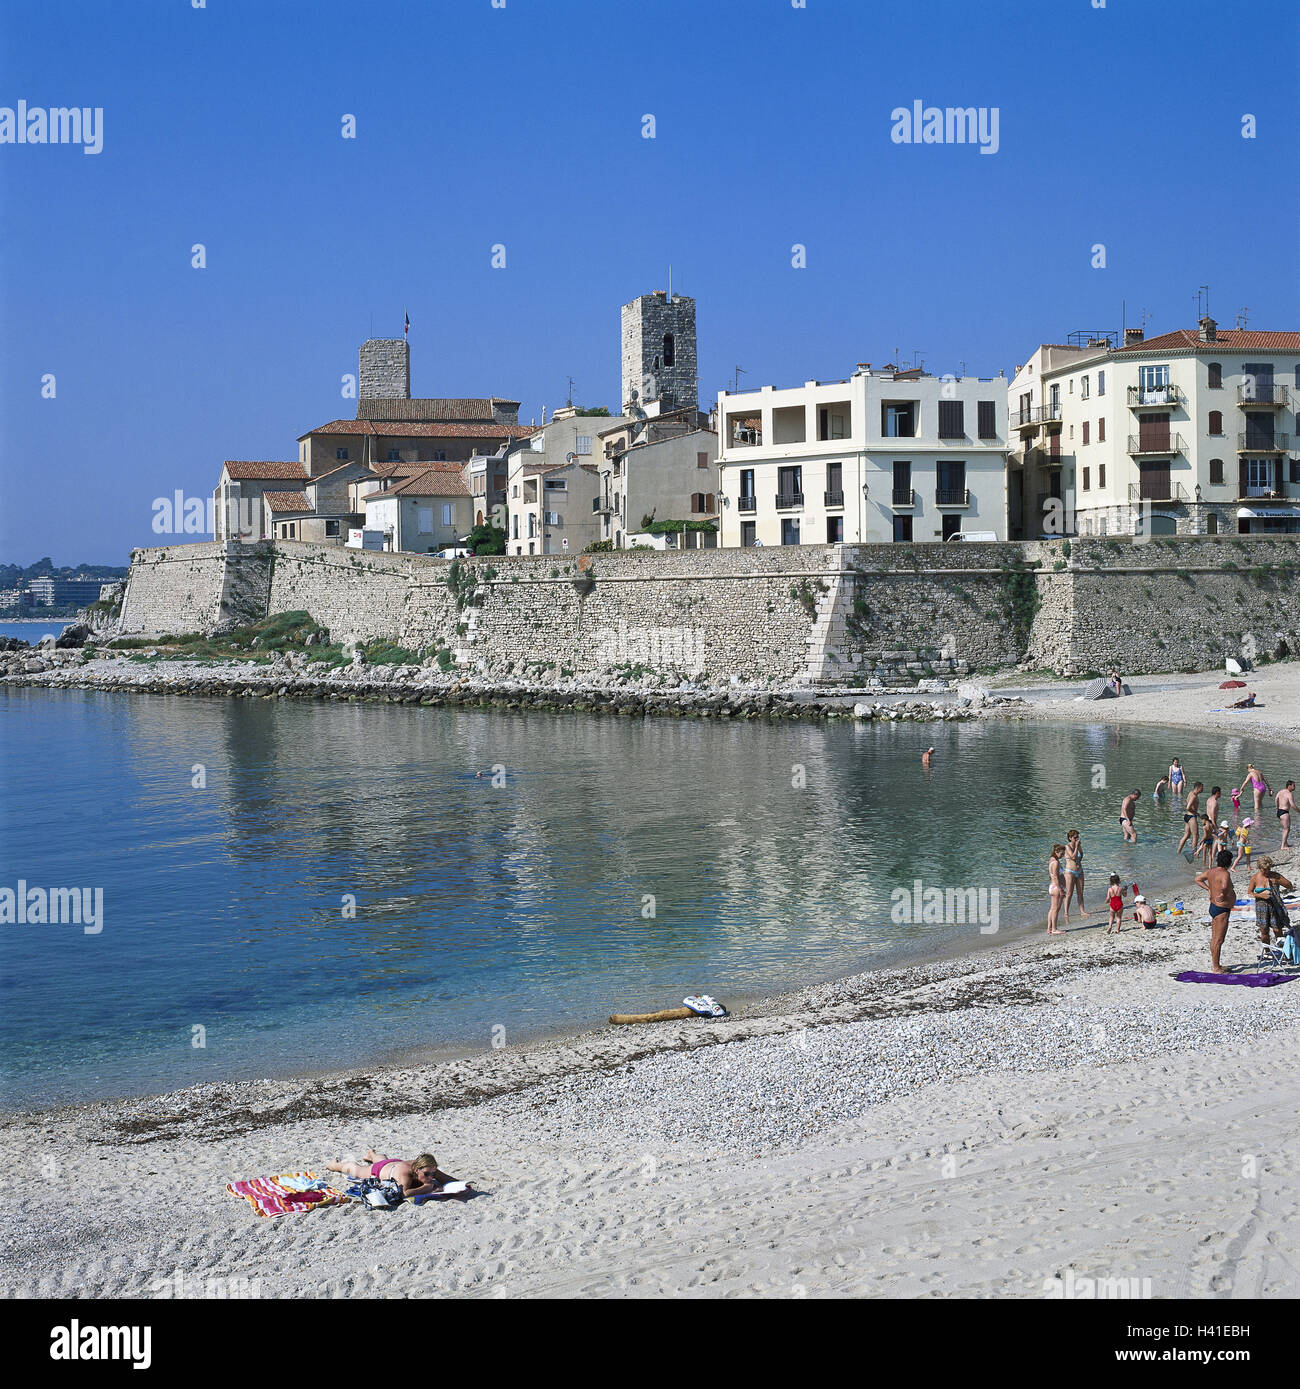 France, Riviera, Côte d'Azur, Baie the Anges, Antibes, town view, Old Town, beach, sea, Europe, France, coast, Département Alpes-Maritimes, Mediterranean coast, French Riviera, bay the angels, coast, coastal place, local view, fortress defensive wall, def Stock Photo